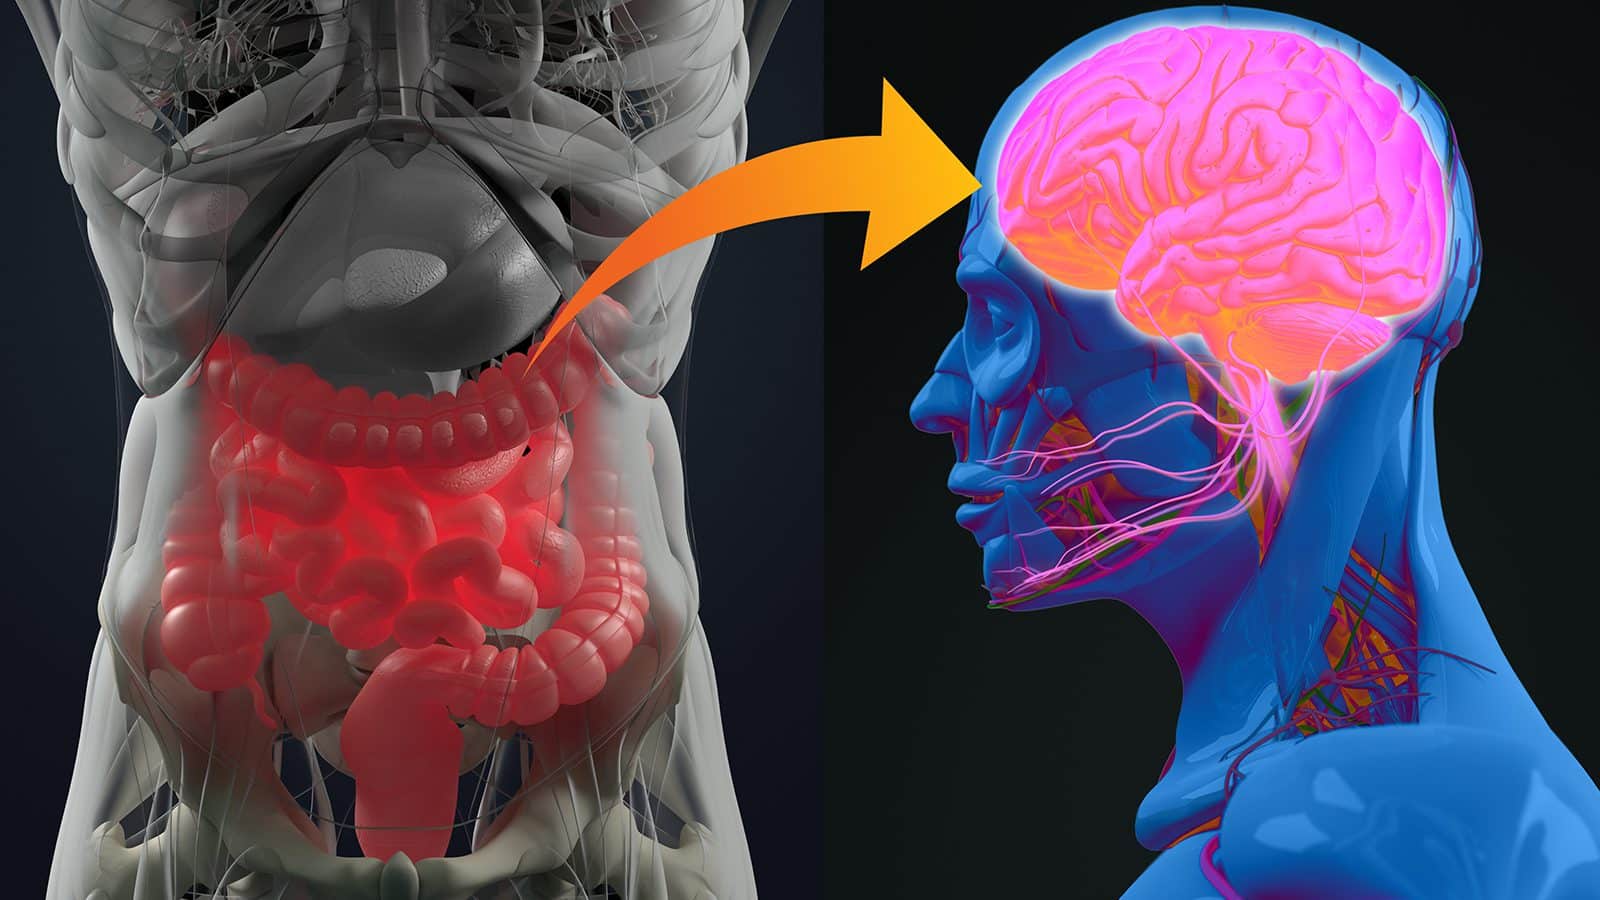 Doctors Explain the Gut-Brain Axis and How It Improves Health